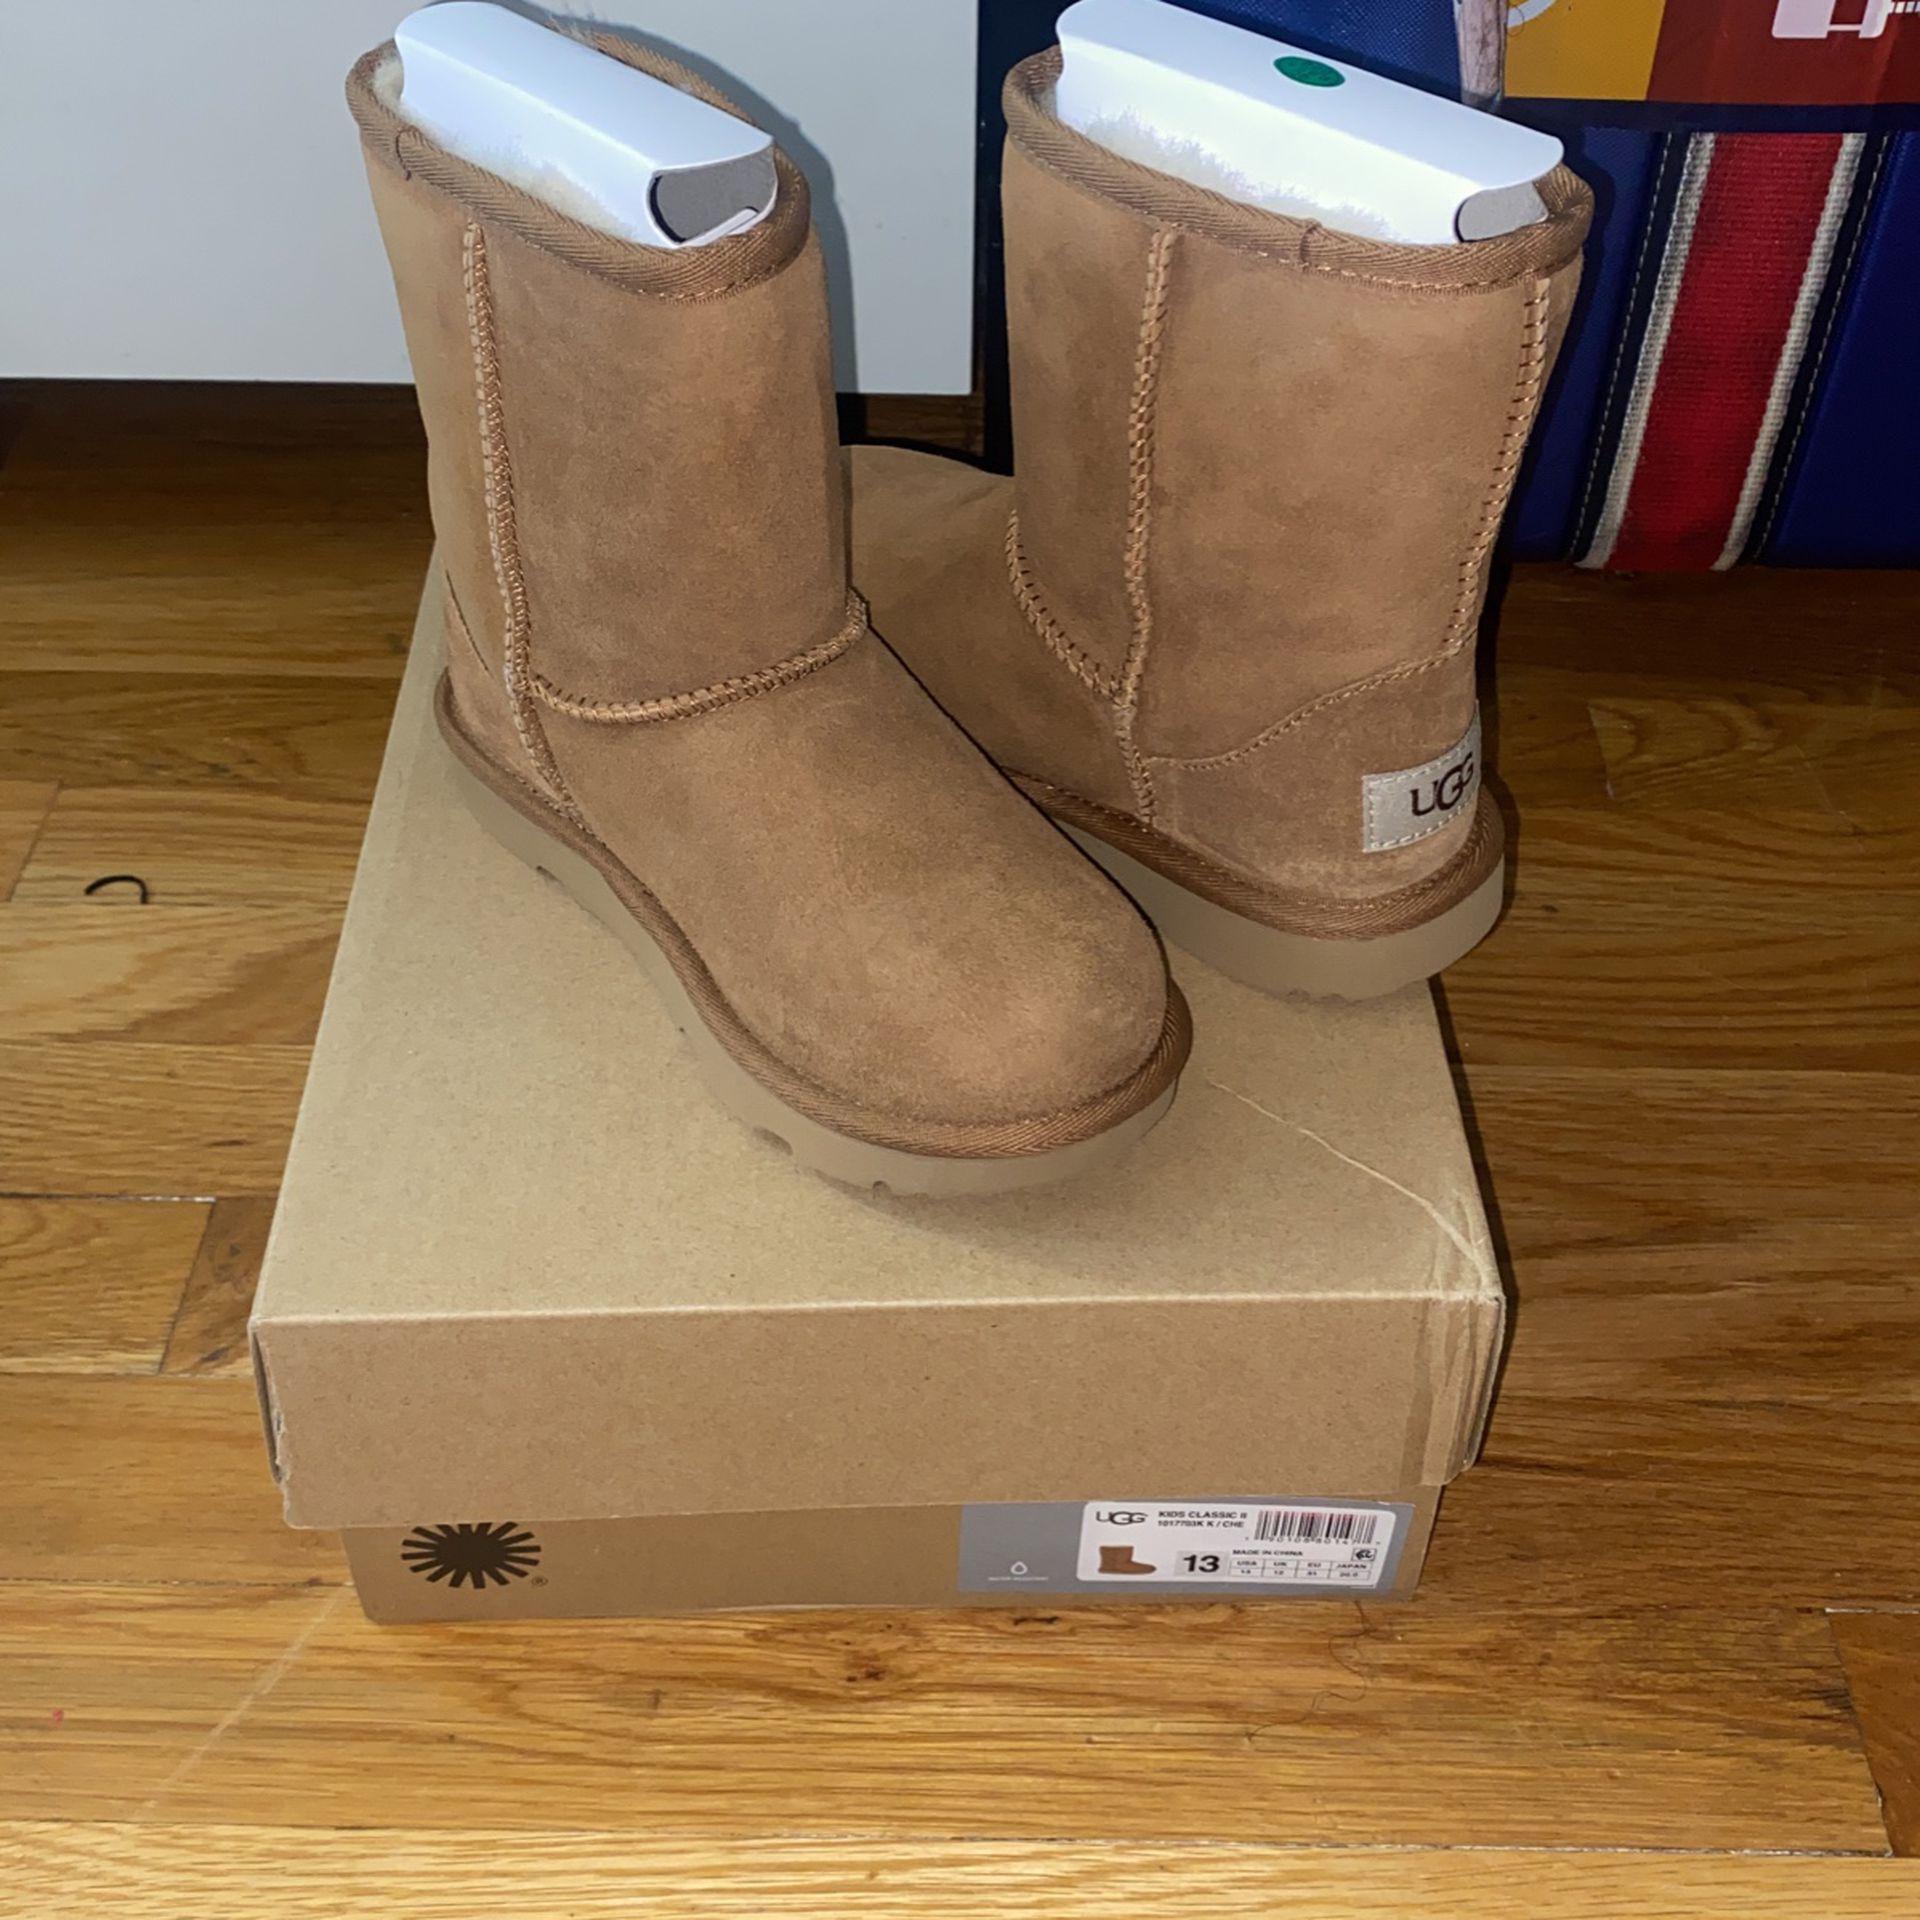 Girls Ugg Boots- Brand New In Box-Size 13